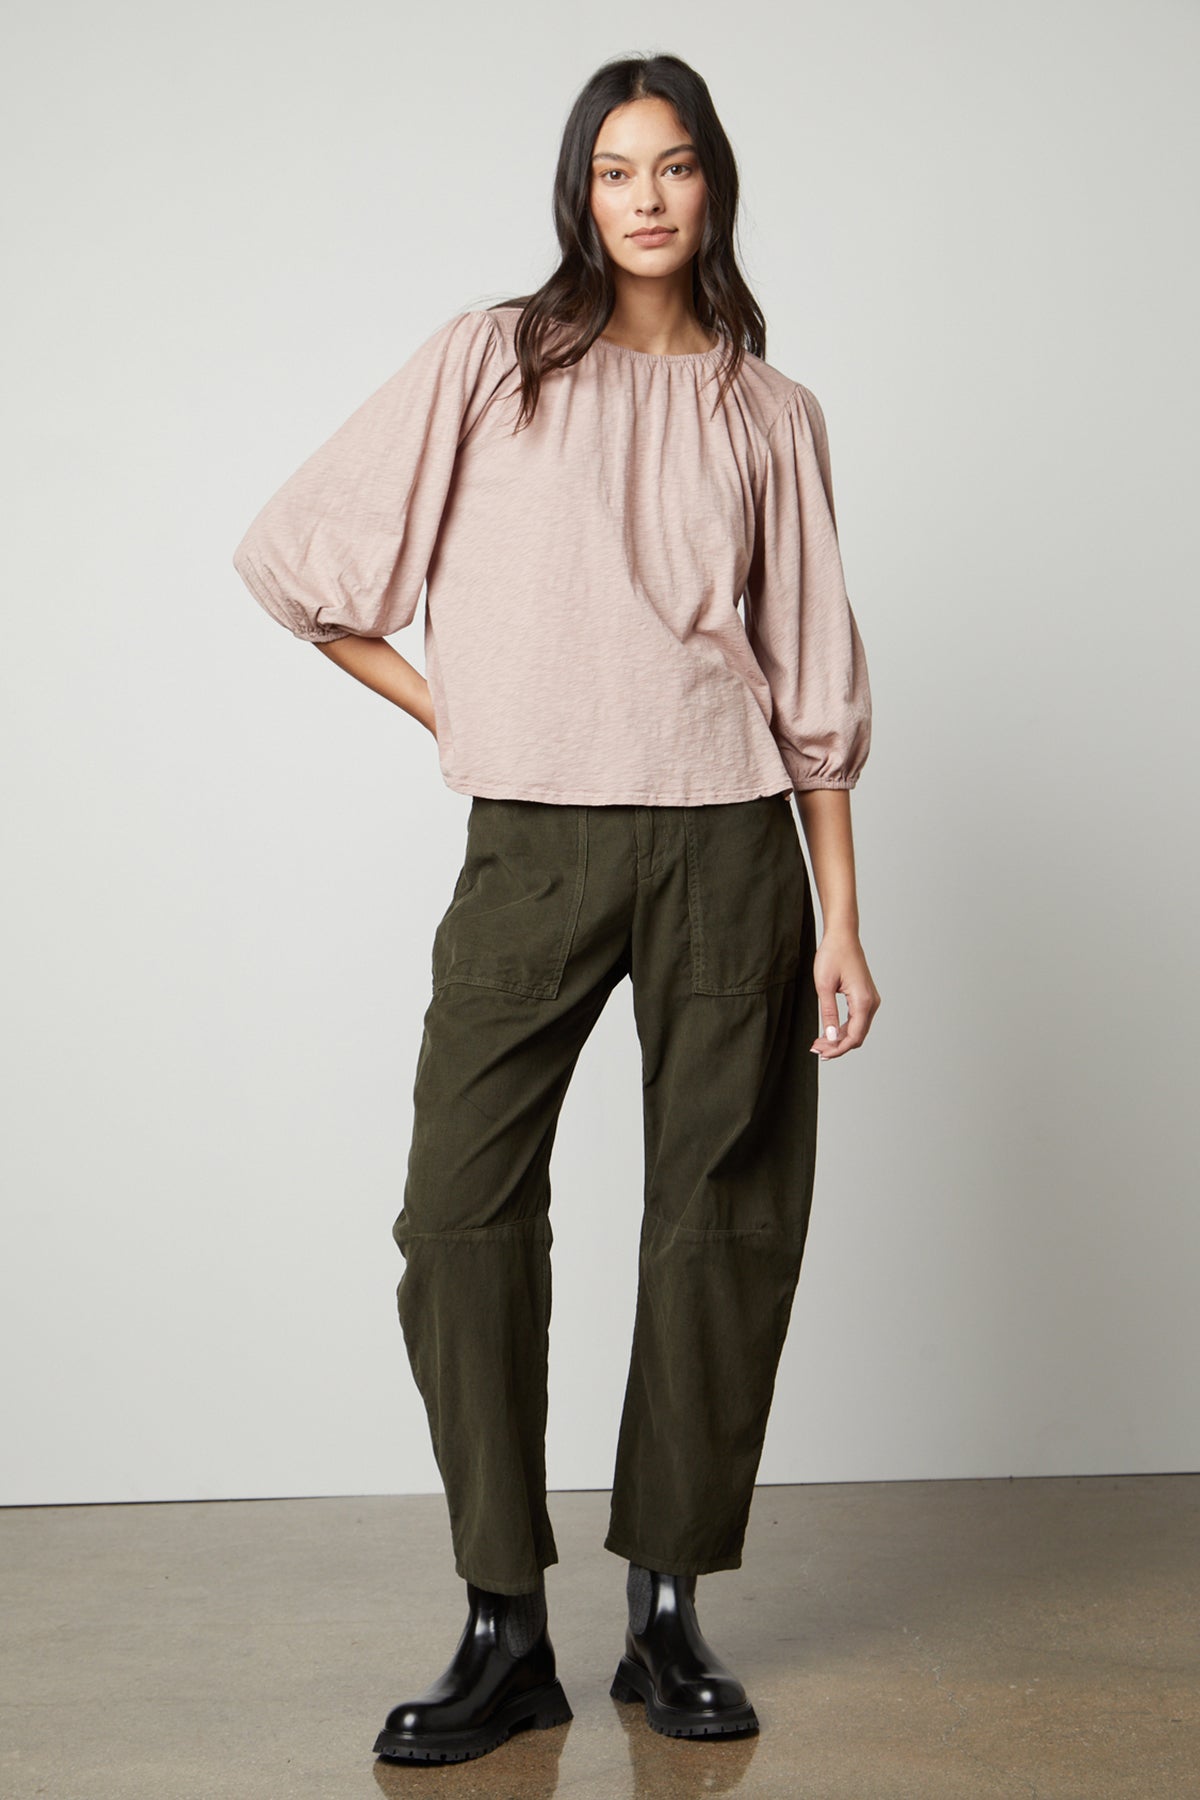 The model is wearing olive trousers and a Velvet by Graham & Spencer JULIE 3/4 SLEEVE TEE.-26727740342465